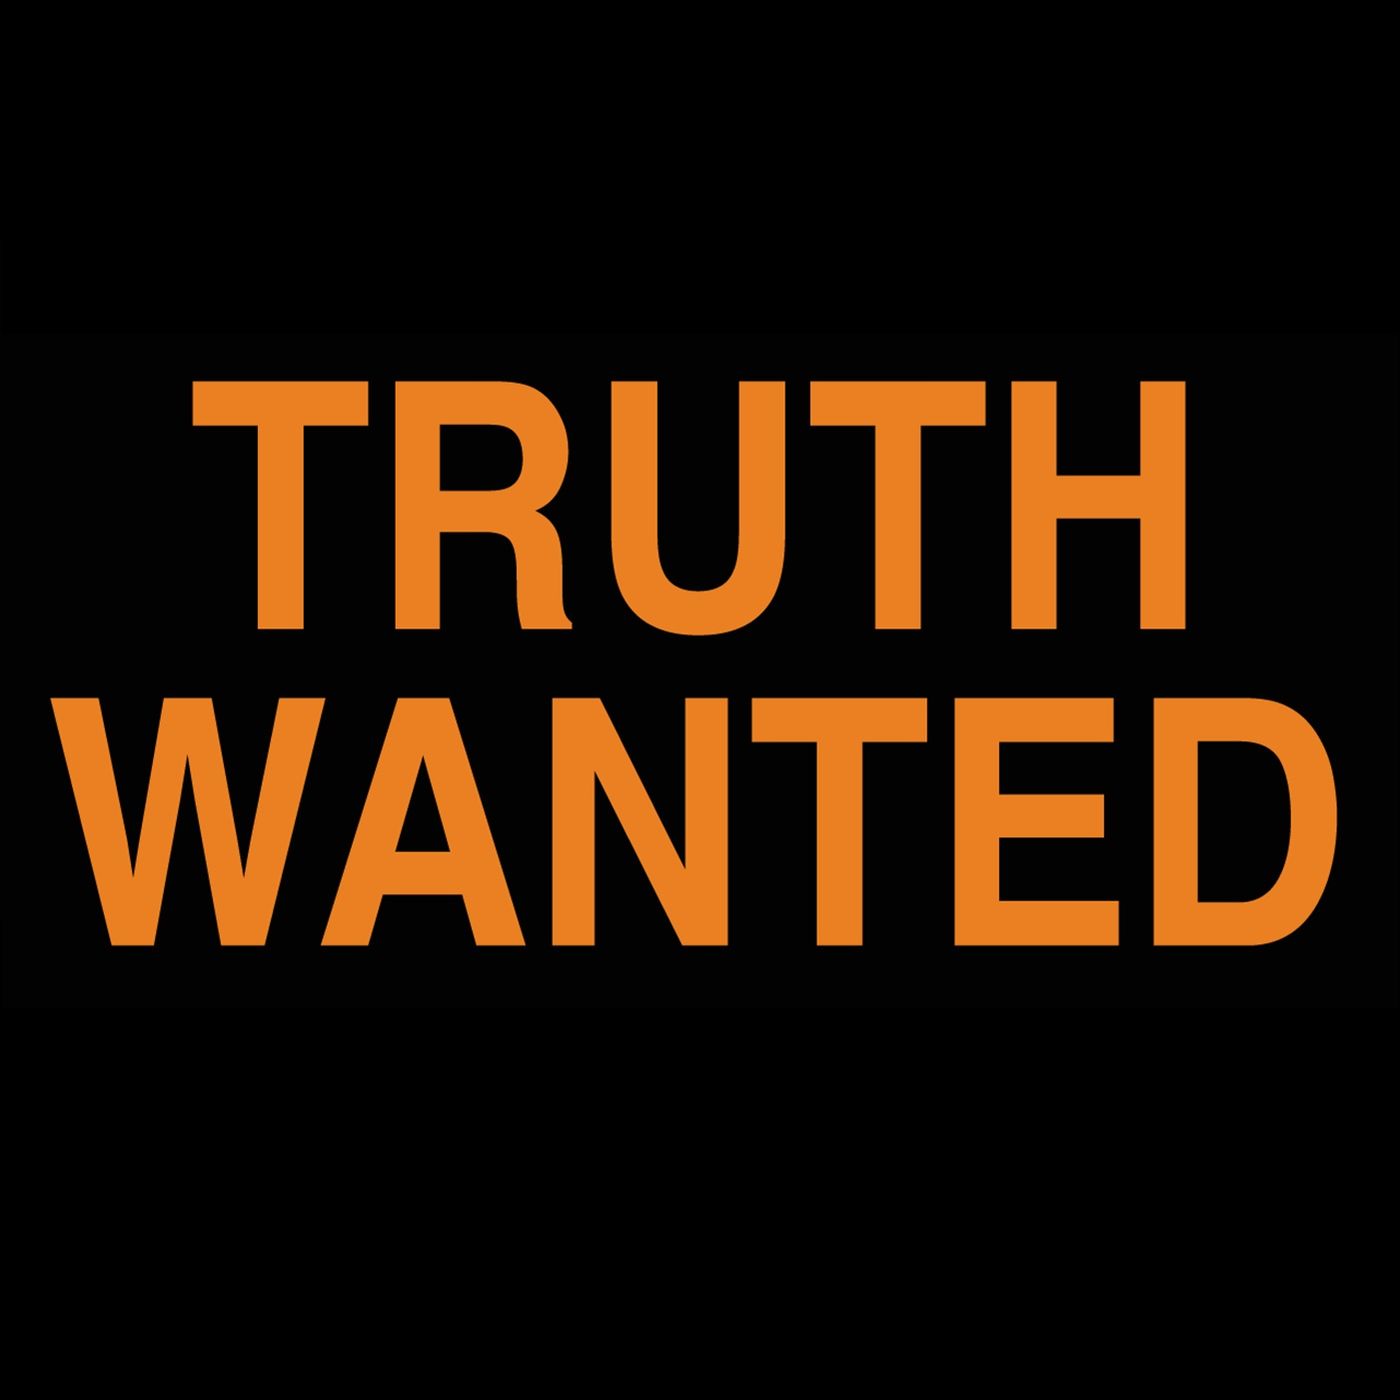 Truth Wanted 07.15 with ObjectivelyDan and Phil Ferguson